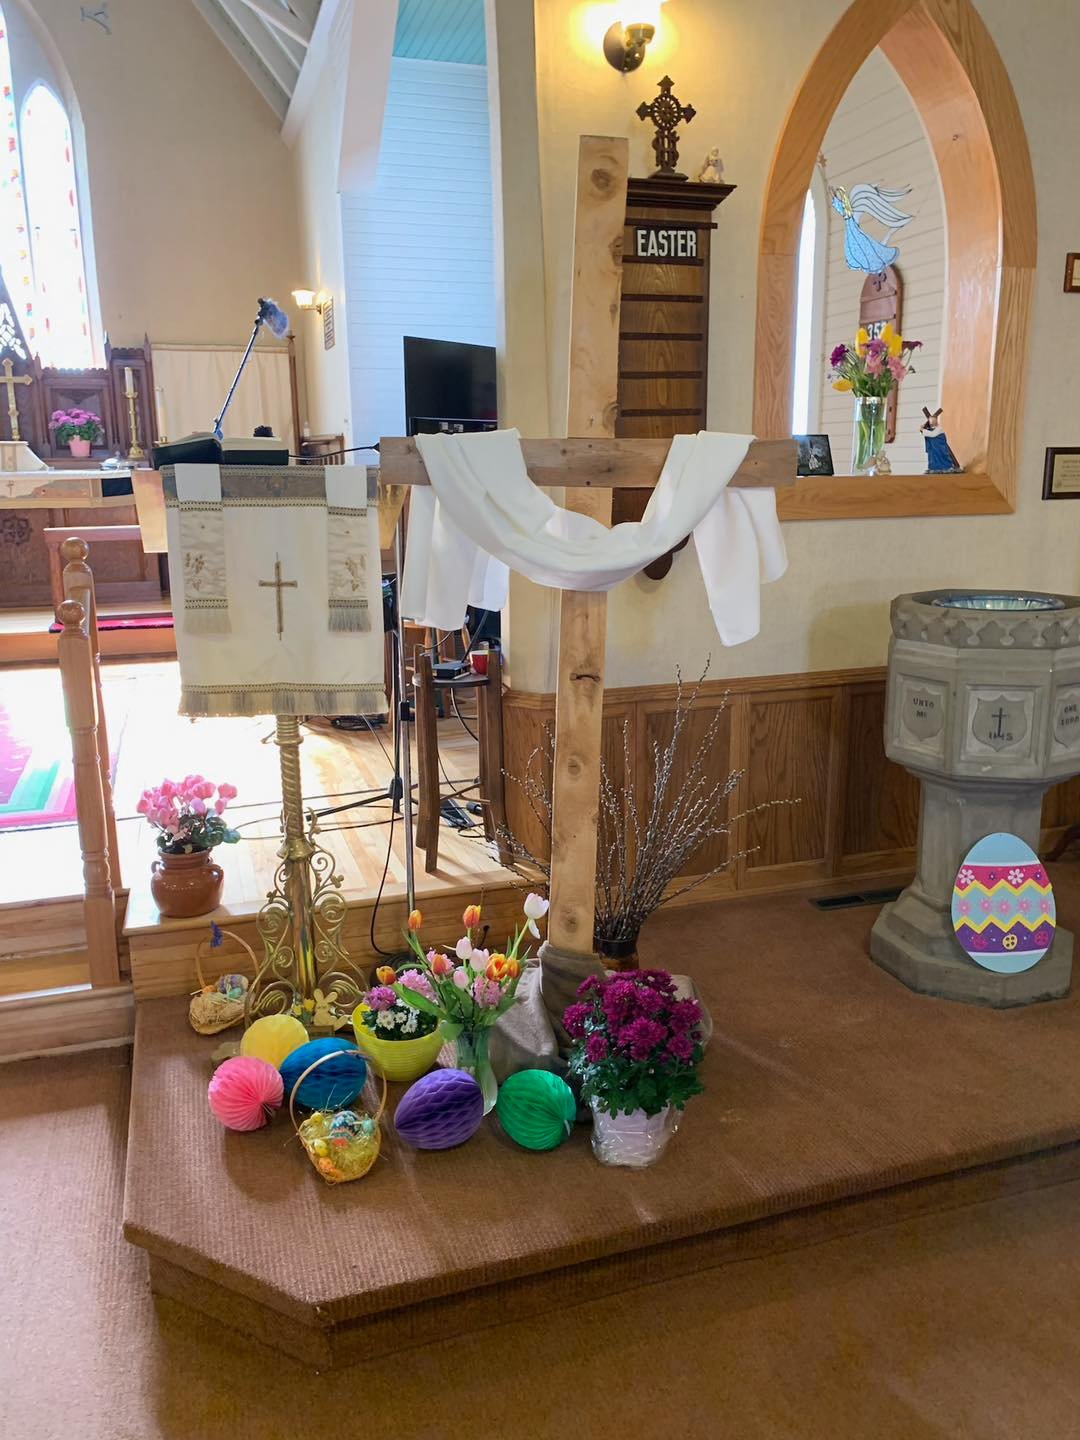 Easter Sunday, April 9th, at St. Luke's and St. Mark's